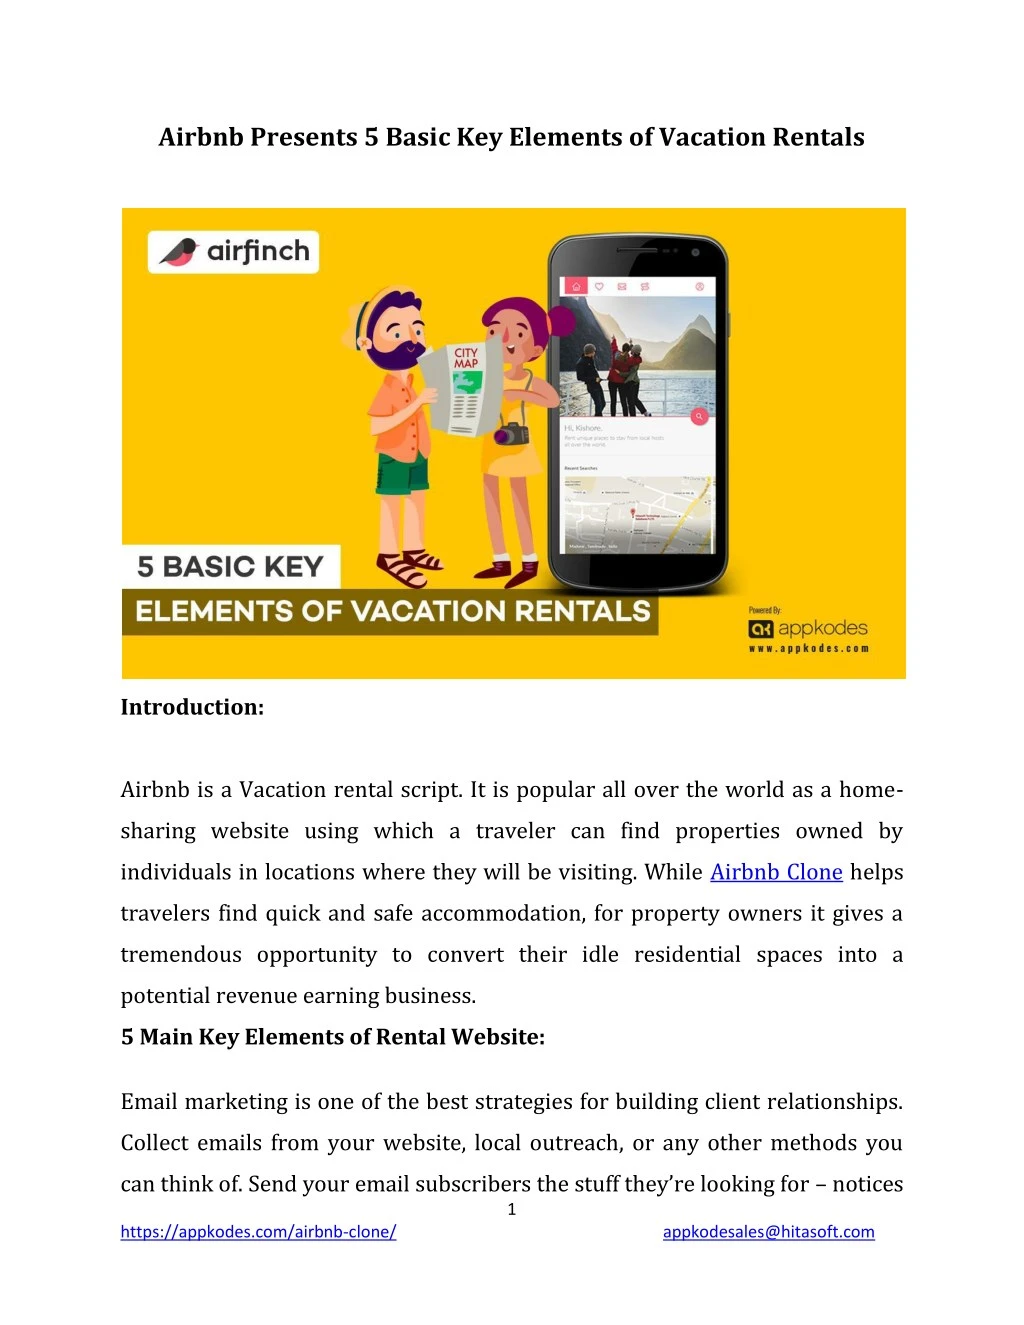 airbnb presents 5 basic key elements of vacation